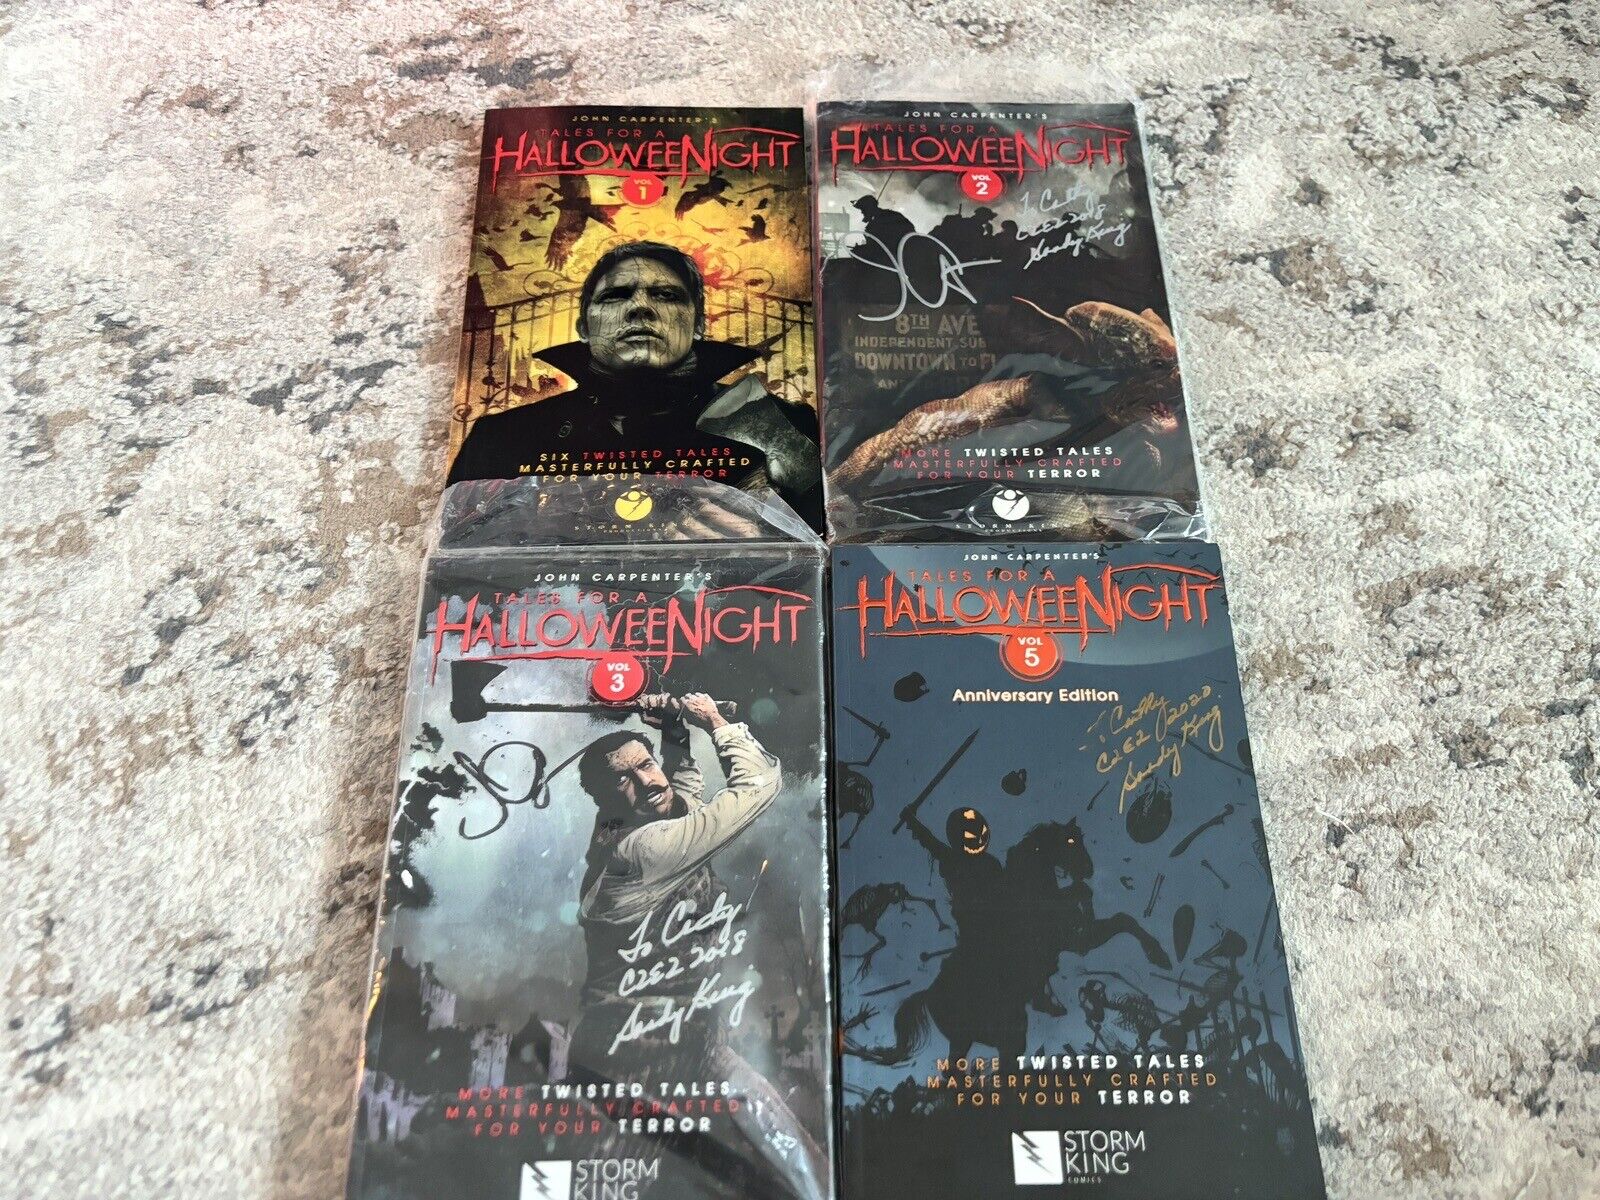 John Carpenter's Tales For A Halloweenight Vols 1, 2, 3, 5 - Some signed